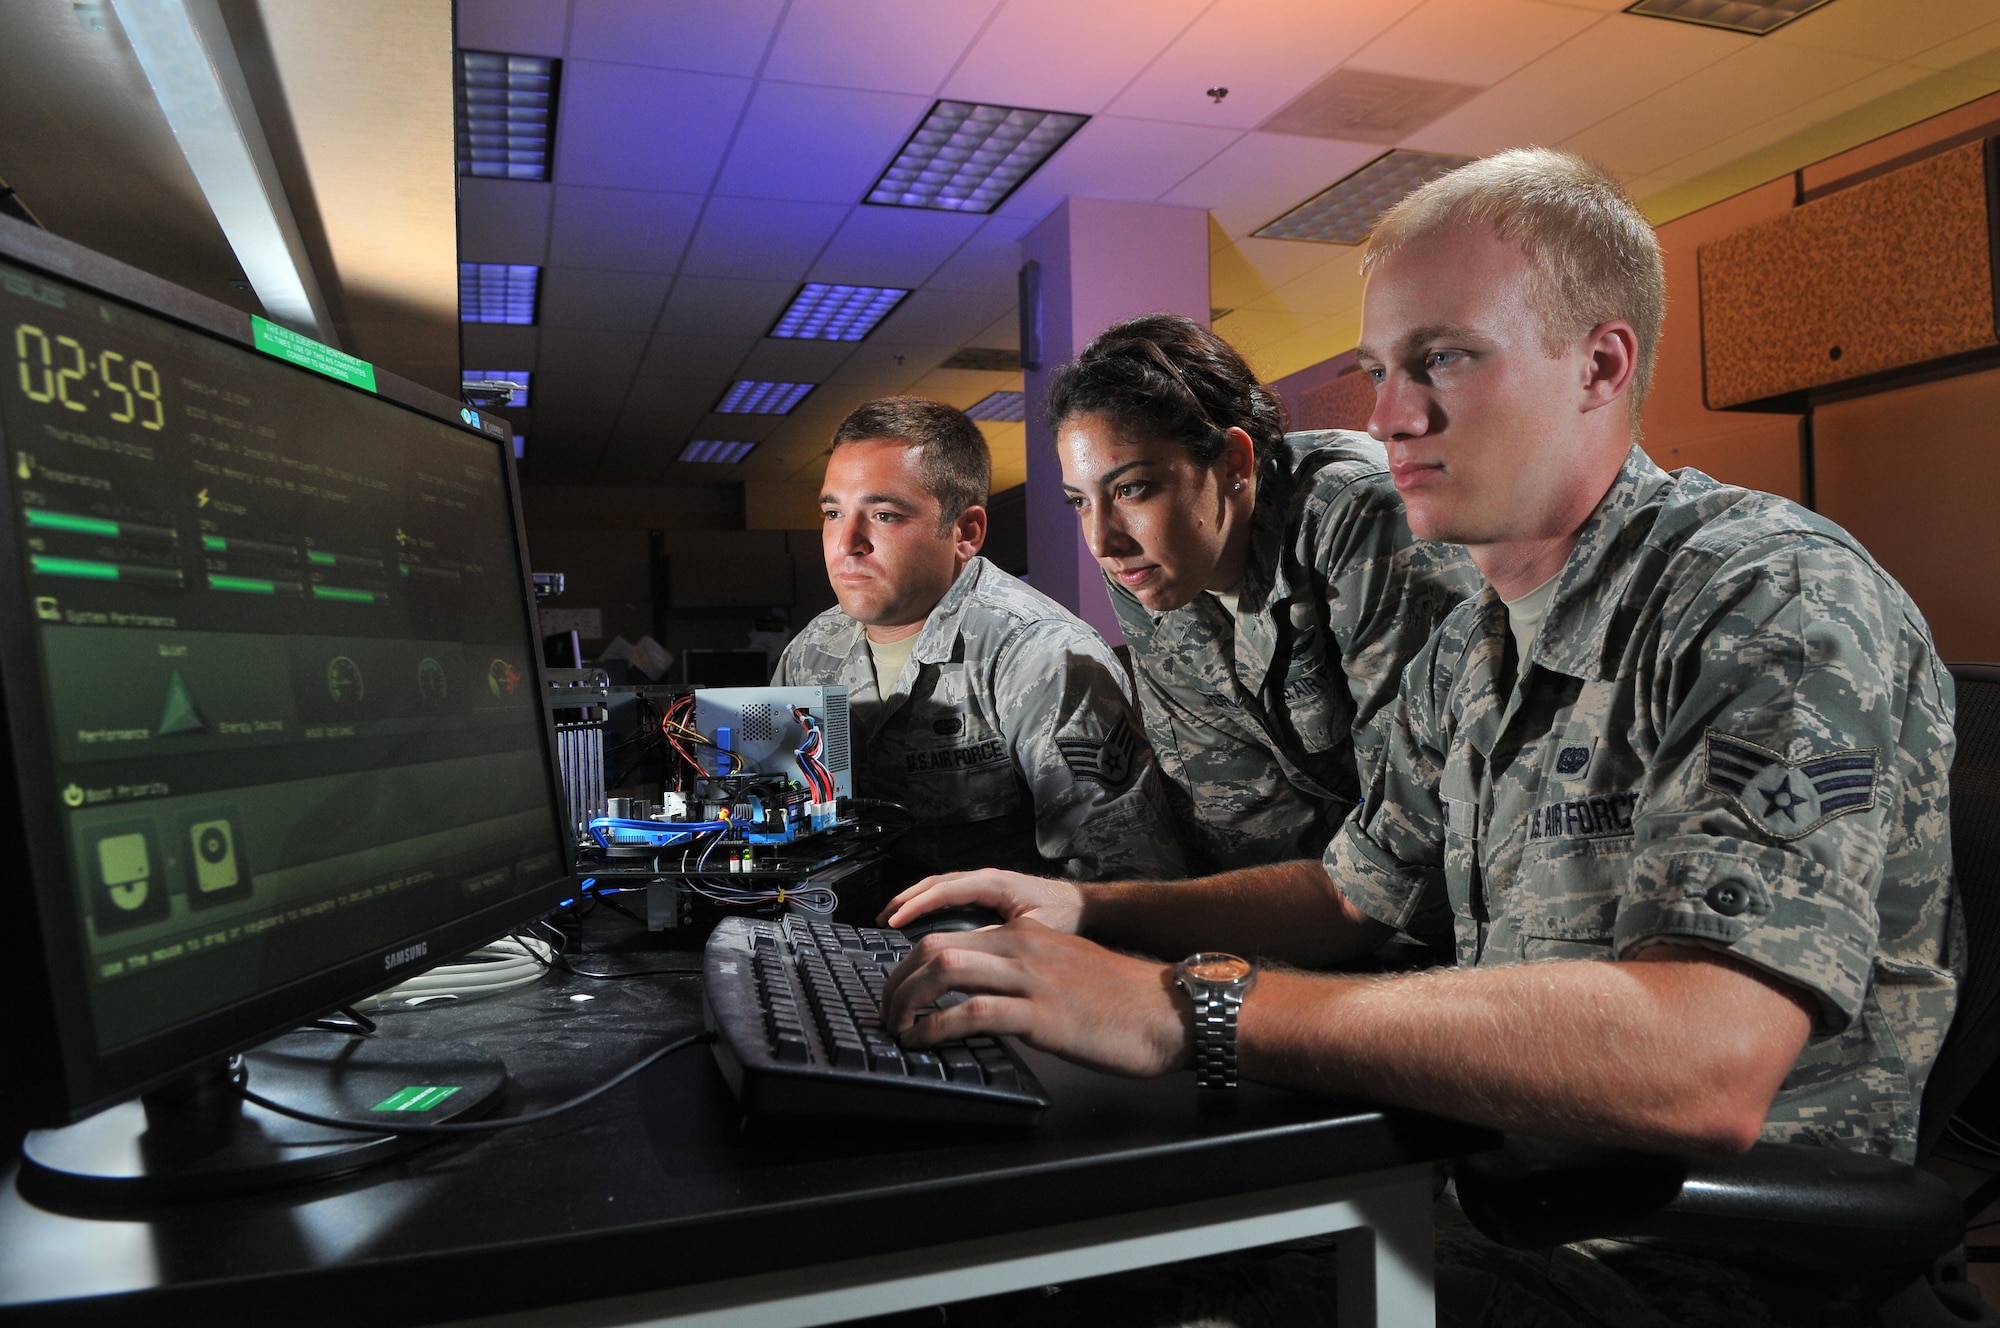 2nd Lt. Stephanie Stanford, 90th Information Operations Squadron cyber development lead, Staff Sgt. Aaron Wendel, 90th IOS cyber network technician, and Senior Airman Brett Tucker, 90th IOS cyber systems operator, perform cyber operations Aug. 1 at Lackland Air Force Base, Texas. (U.S. Air Force photo by Boyd Belcher)